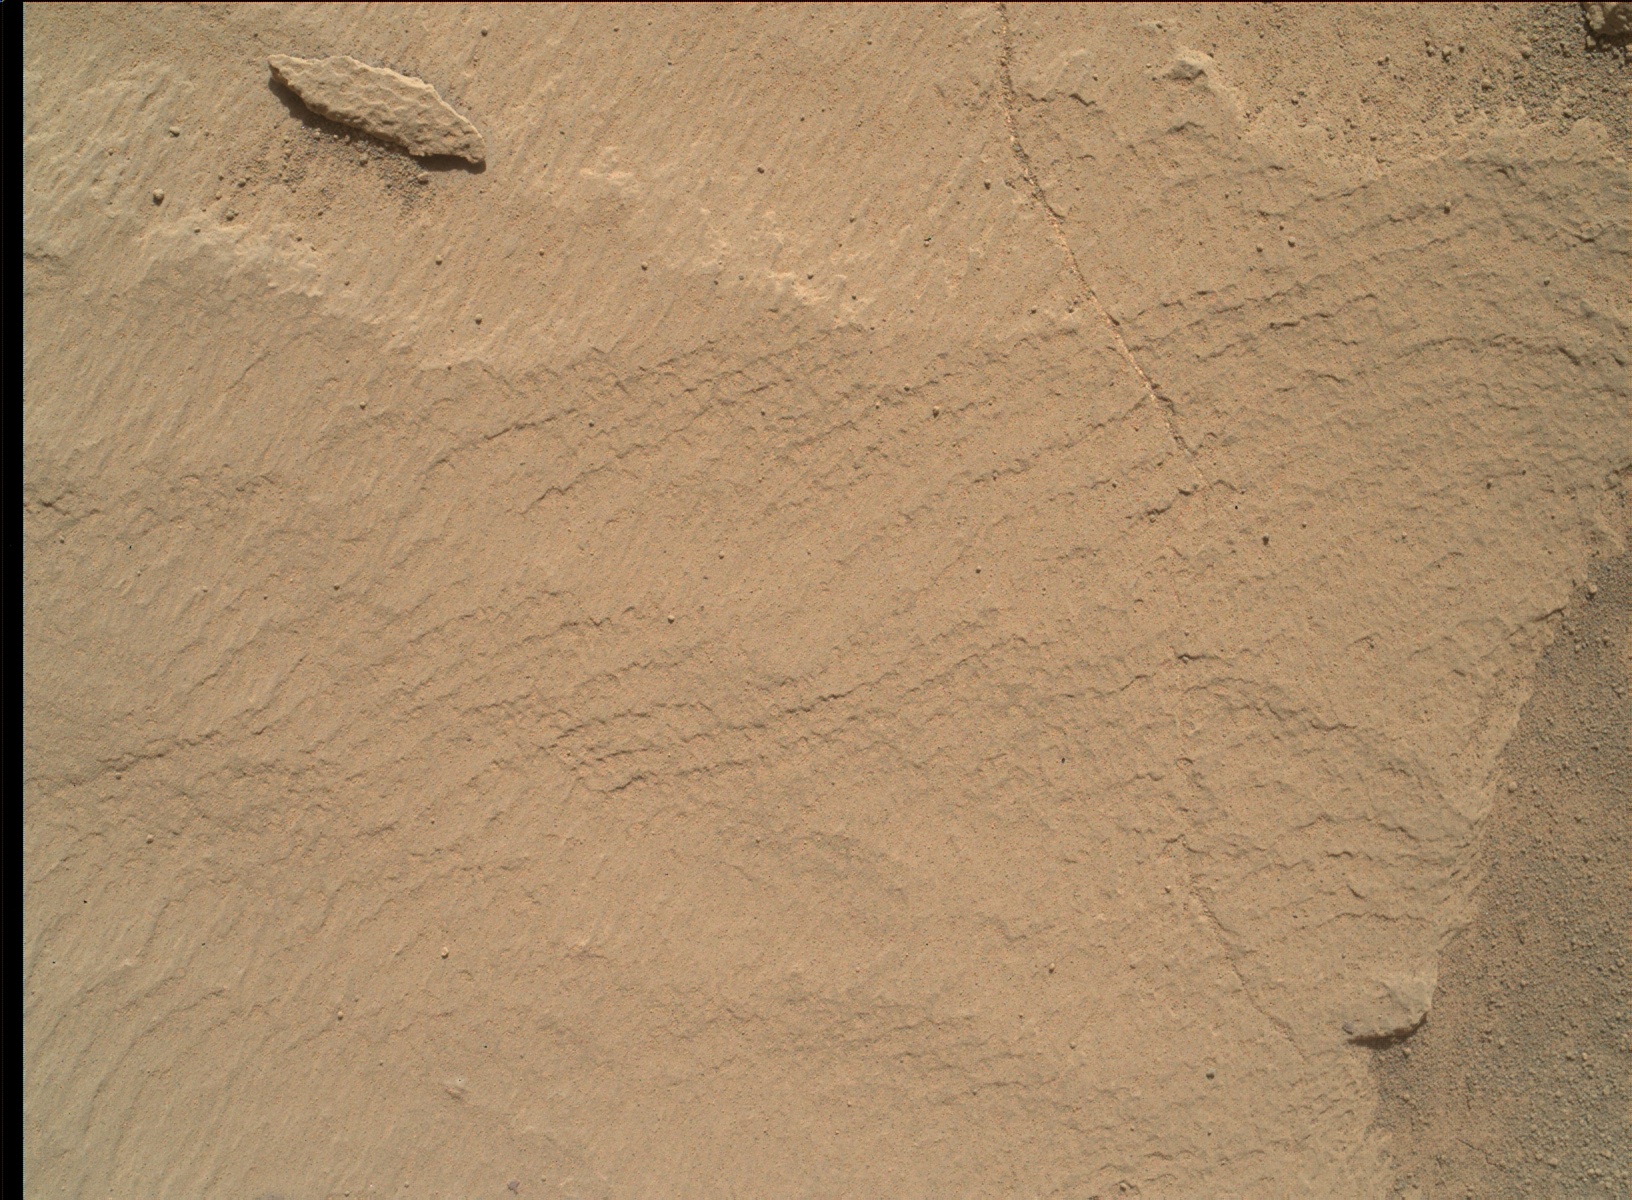 Nasa's Mars rover Curiosity acquired this image using its Mars Hand Lens Imager (MAHLI) on Sol 1166